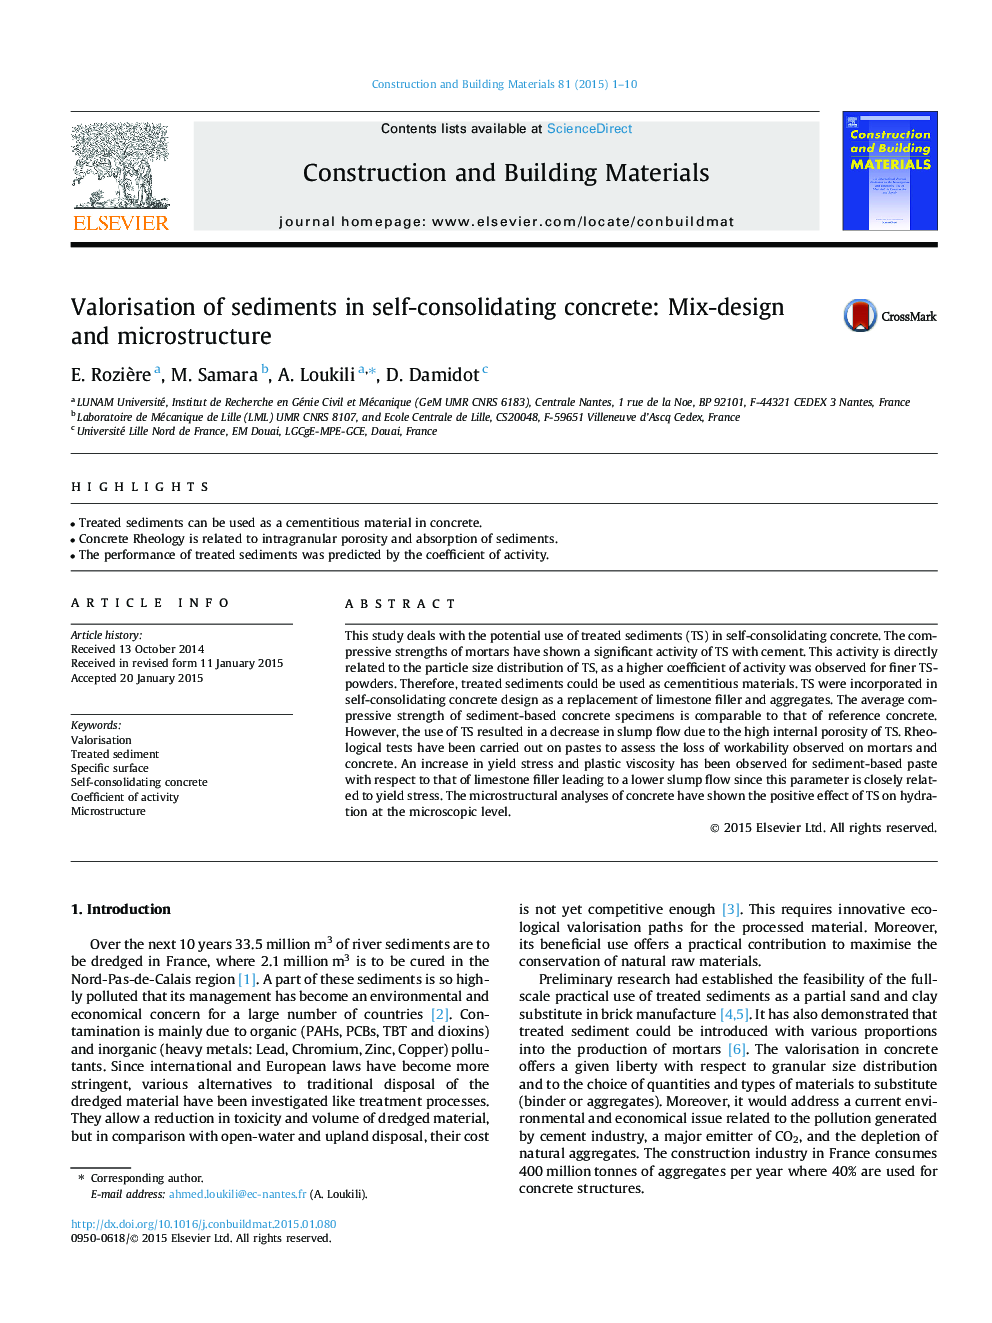 Valorisation of sediments in self-consolidating concrete: Mix-design and microstructure